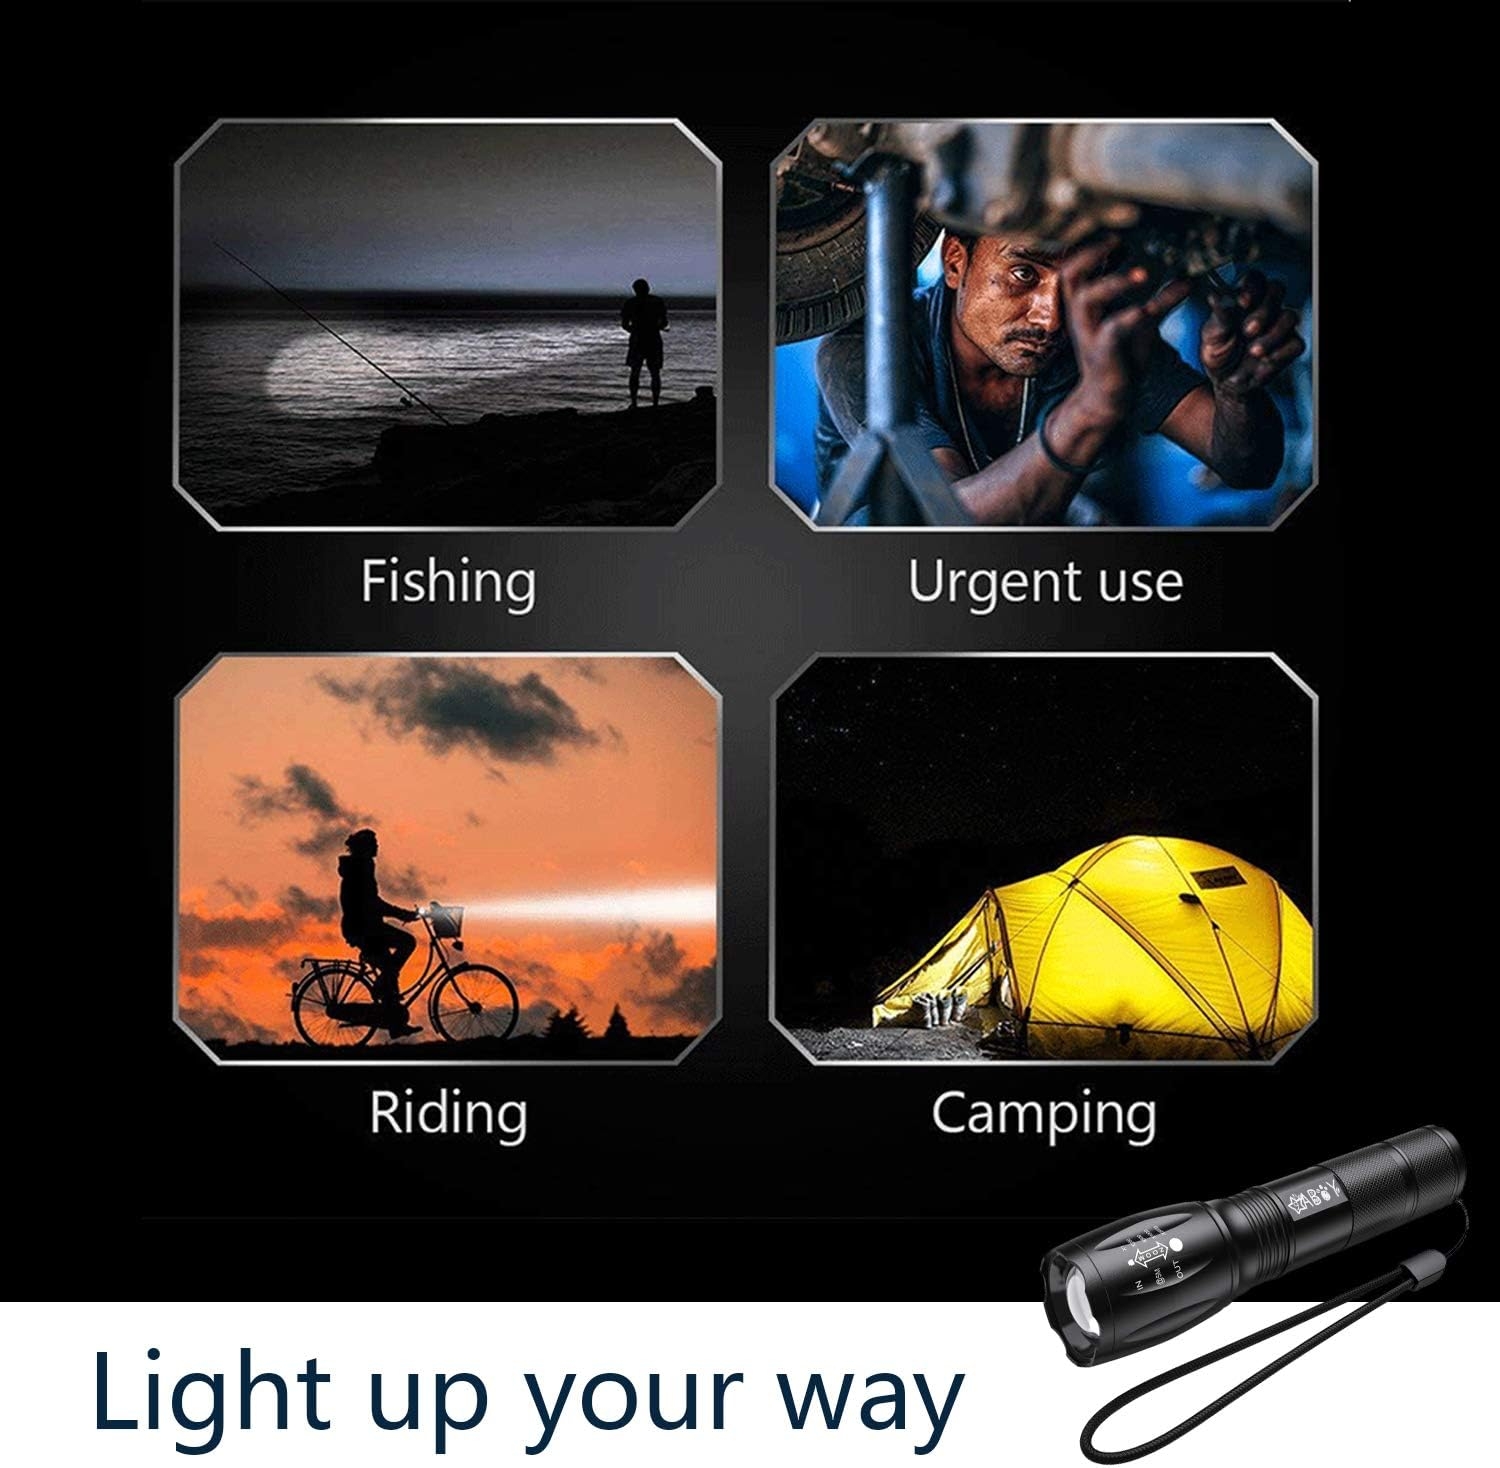 Flashlights, LED Tactical Flashlight Portable S1000 High Lumen with 5 Modes T6 Handheld Light Water Resistant Zoomable Best Camping Biking Hiking Outdoor Emergency for Night Fishing Travel [2 Pack]